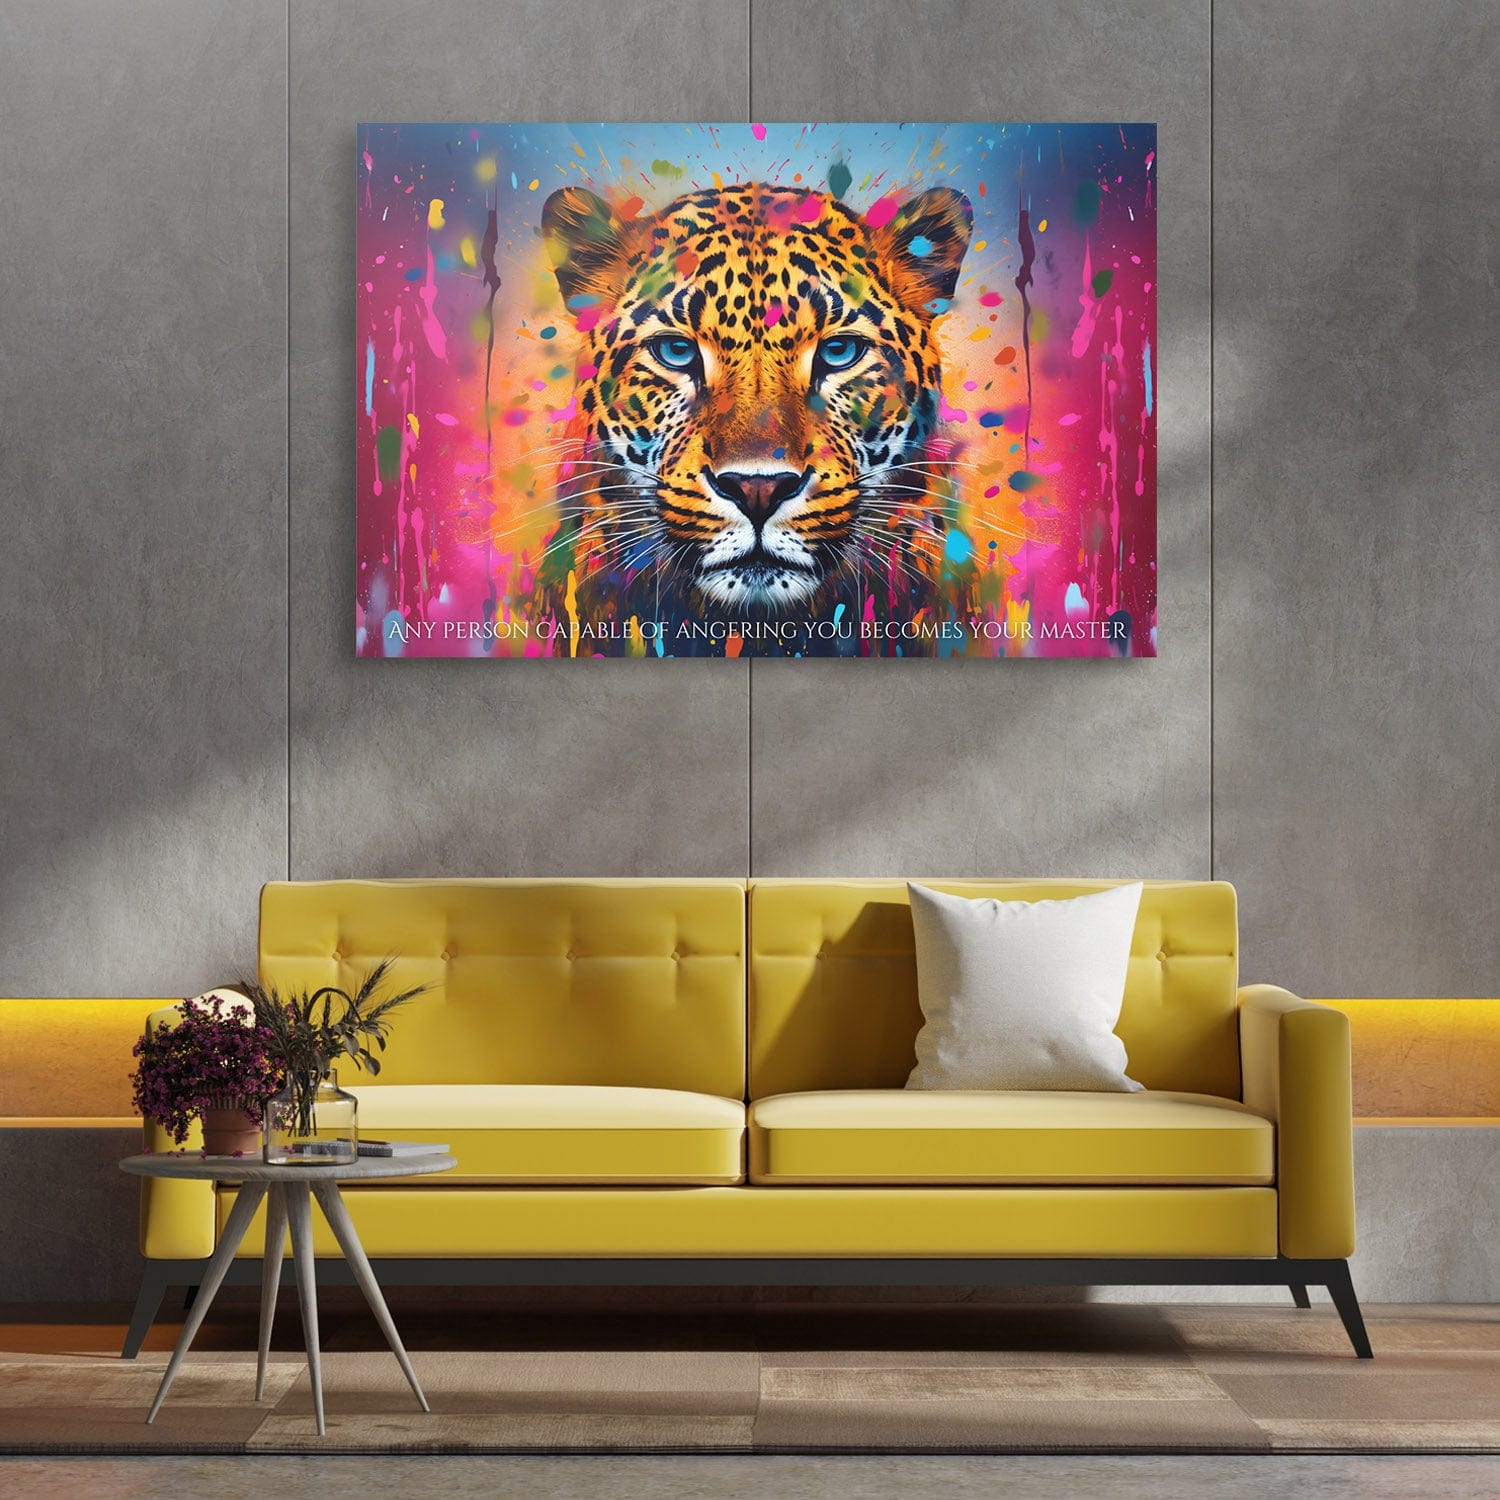 Abstract Leopard - Any Person Capable of Angering You Epictetus Quote Wall Art | Inspirational Wall Art Motivational Wall Art Quotes Office Art | ImpaktMaker Exclusive Canvas Art Landscape